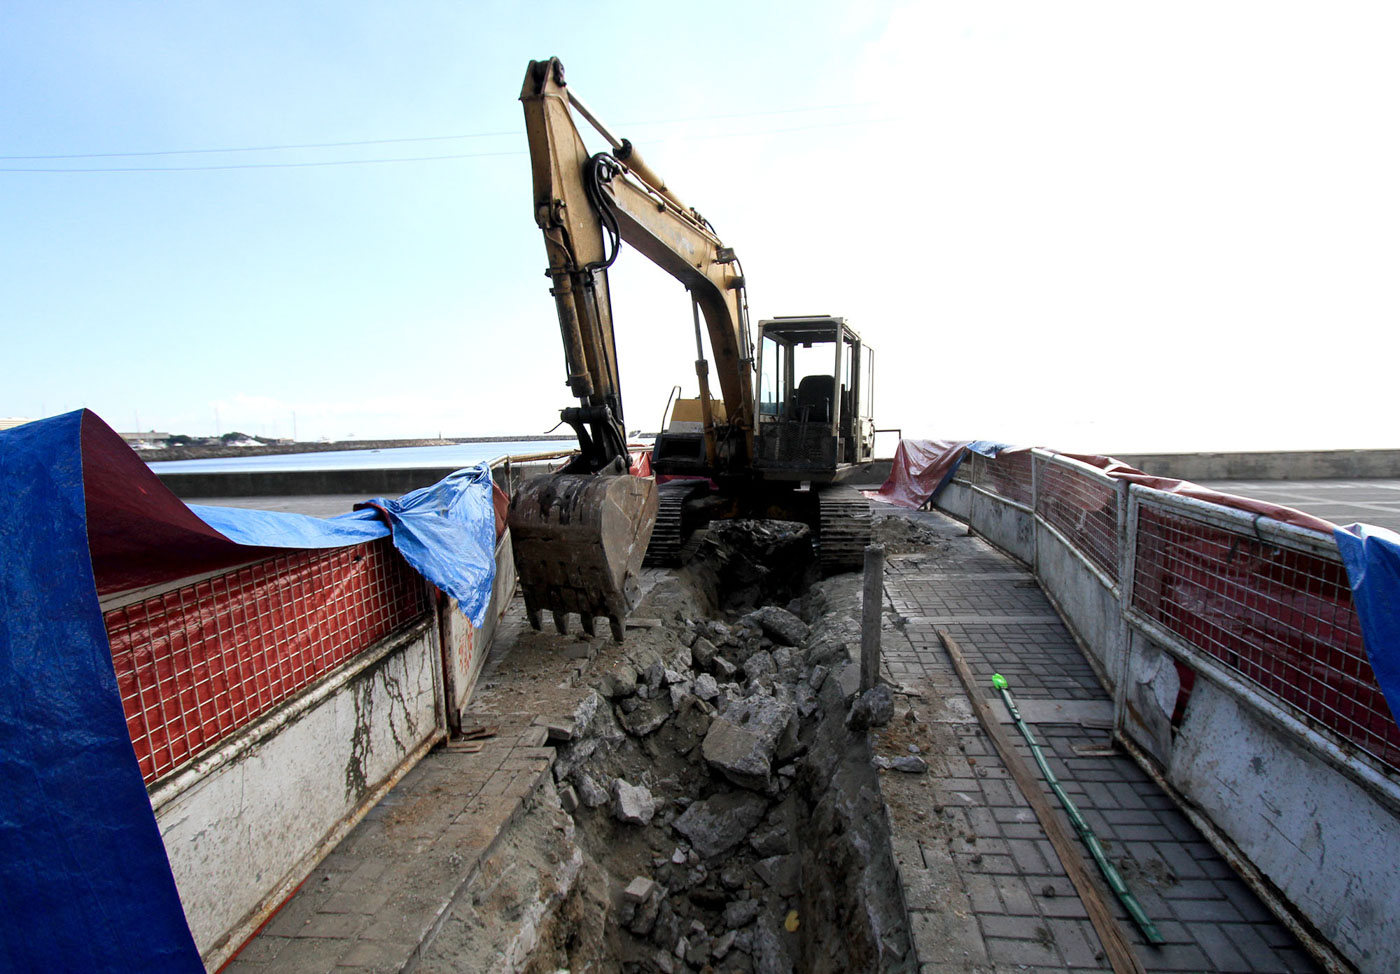 GONE. The DPWH said that it will be constructing a lateral drainage near President Quirino Avenue to reinforce the installation of concrete pipes along the boulevard. Photo by Inoue Jaena/Rappler